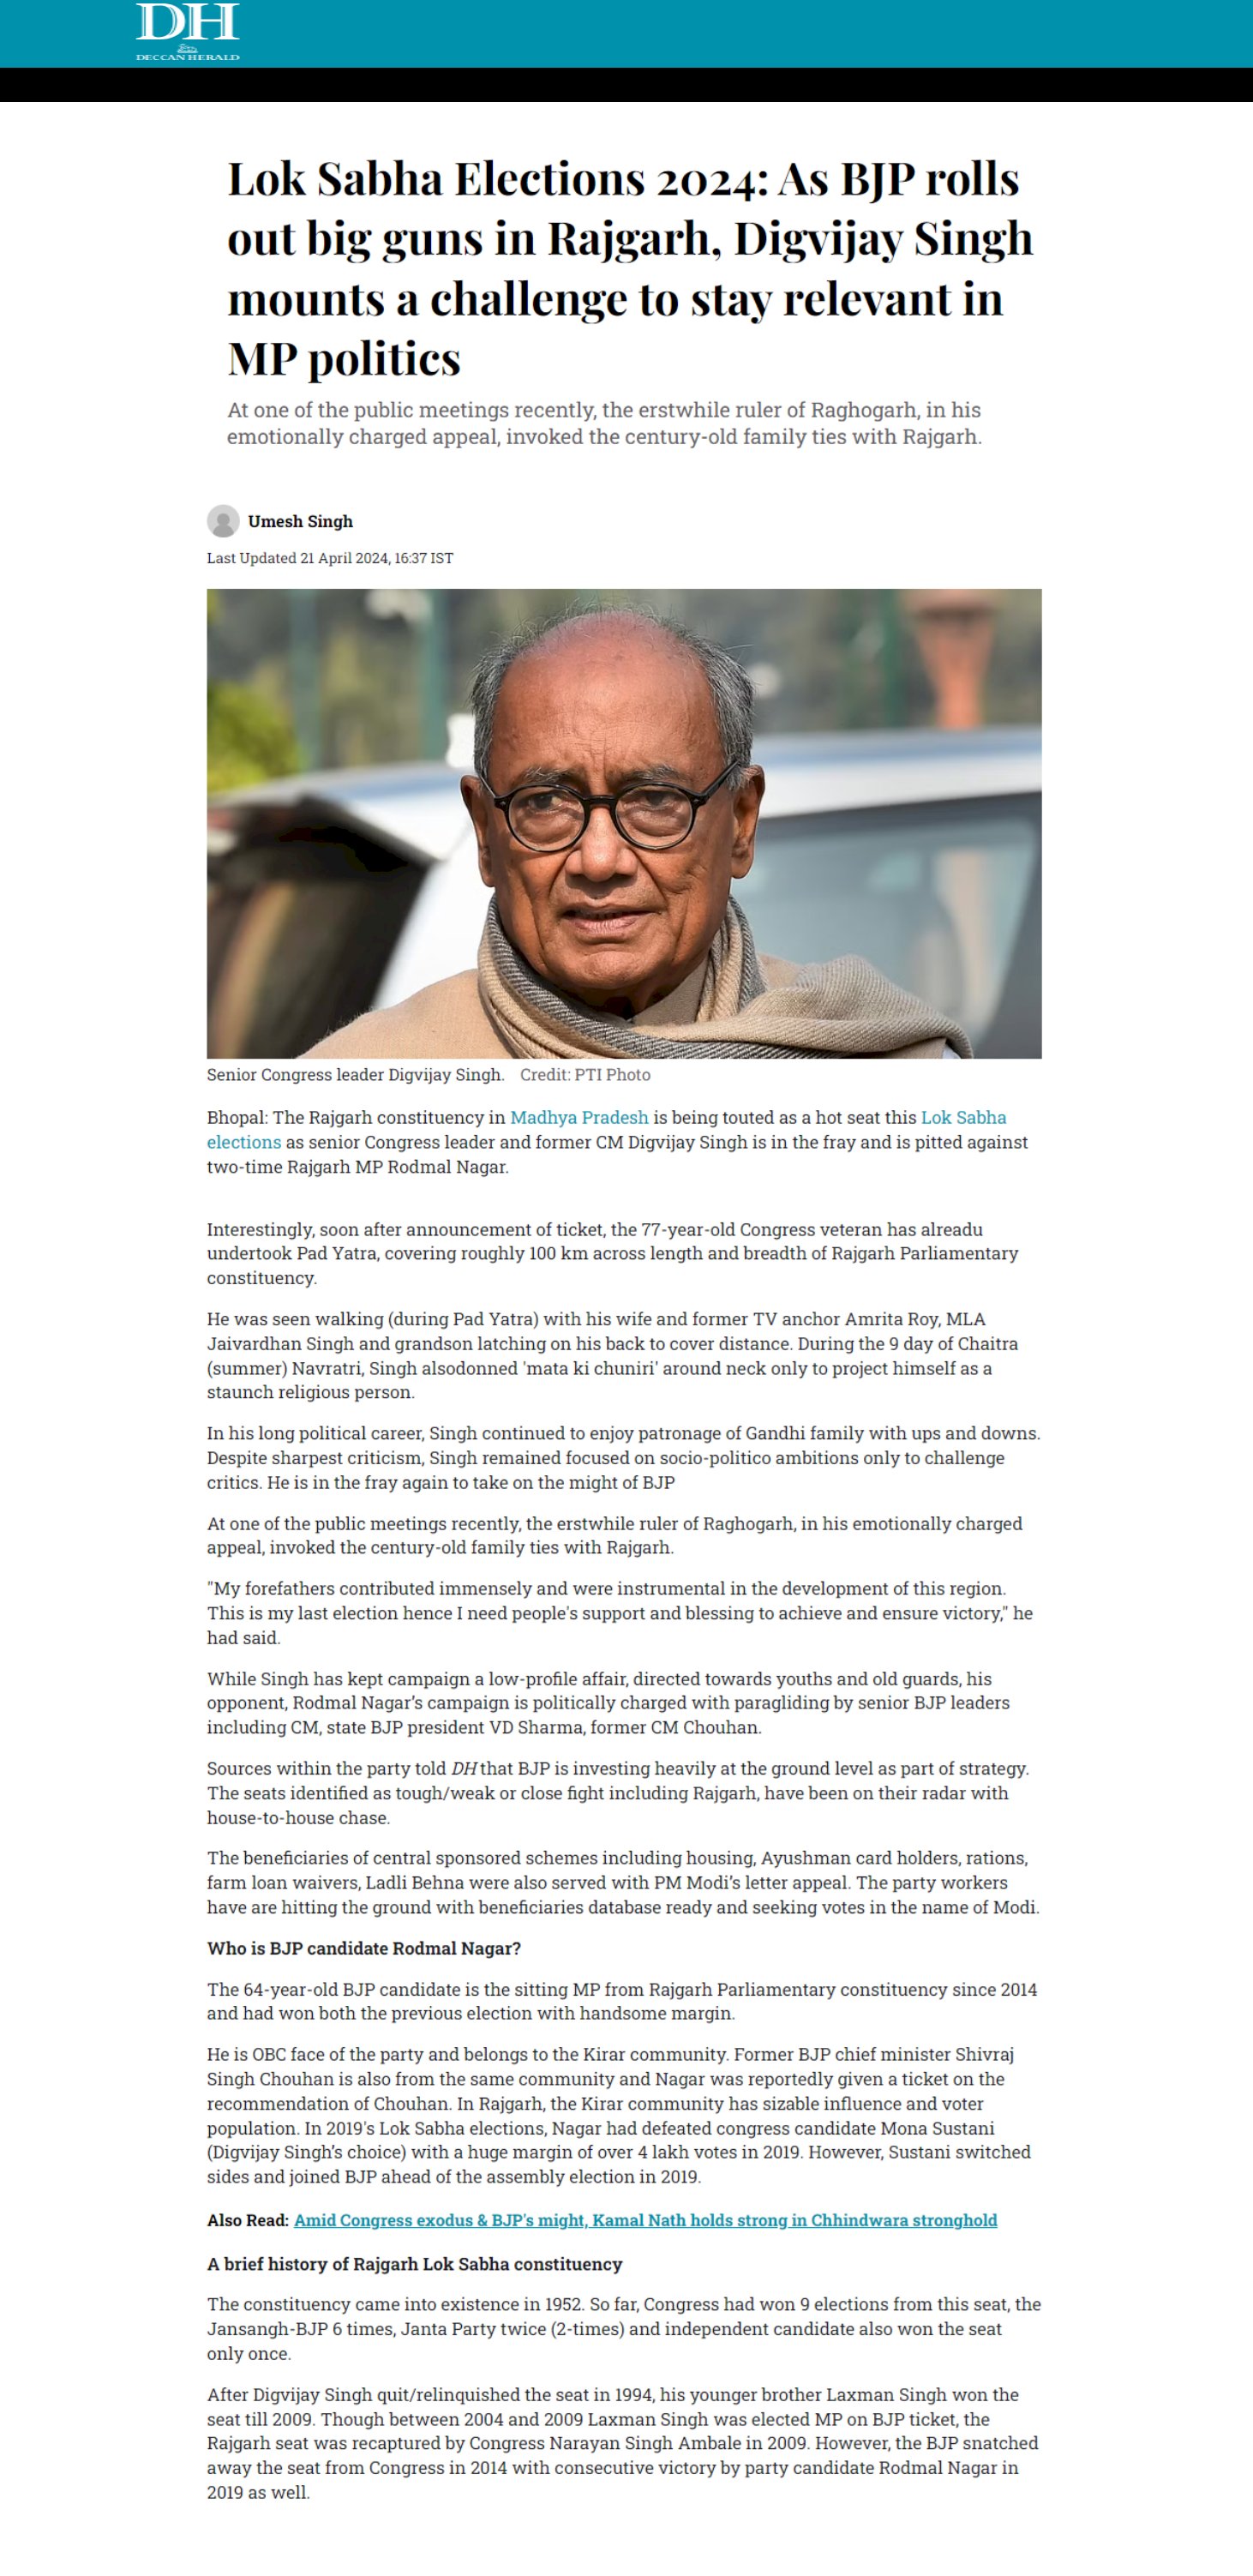 Digvijay Singh mounts a challenge to stay relevant in MP politics